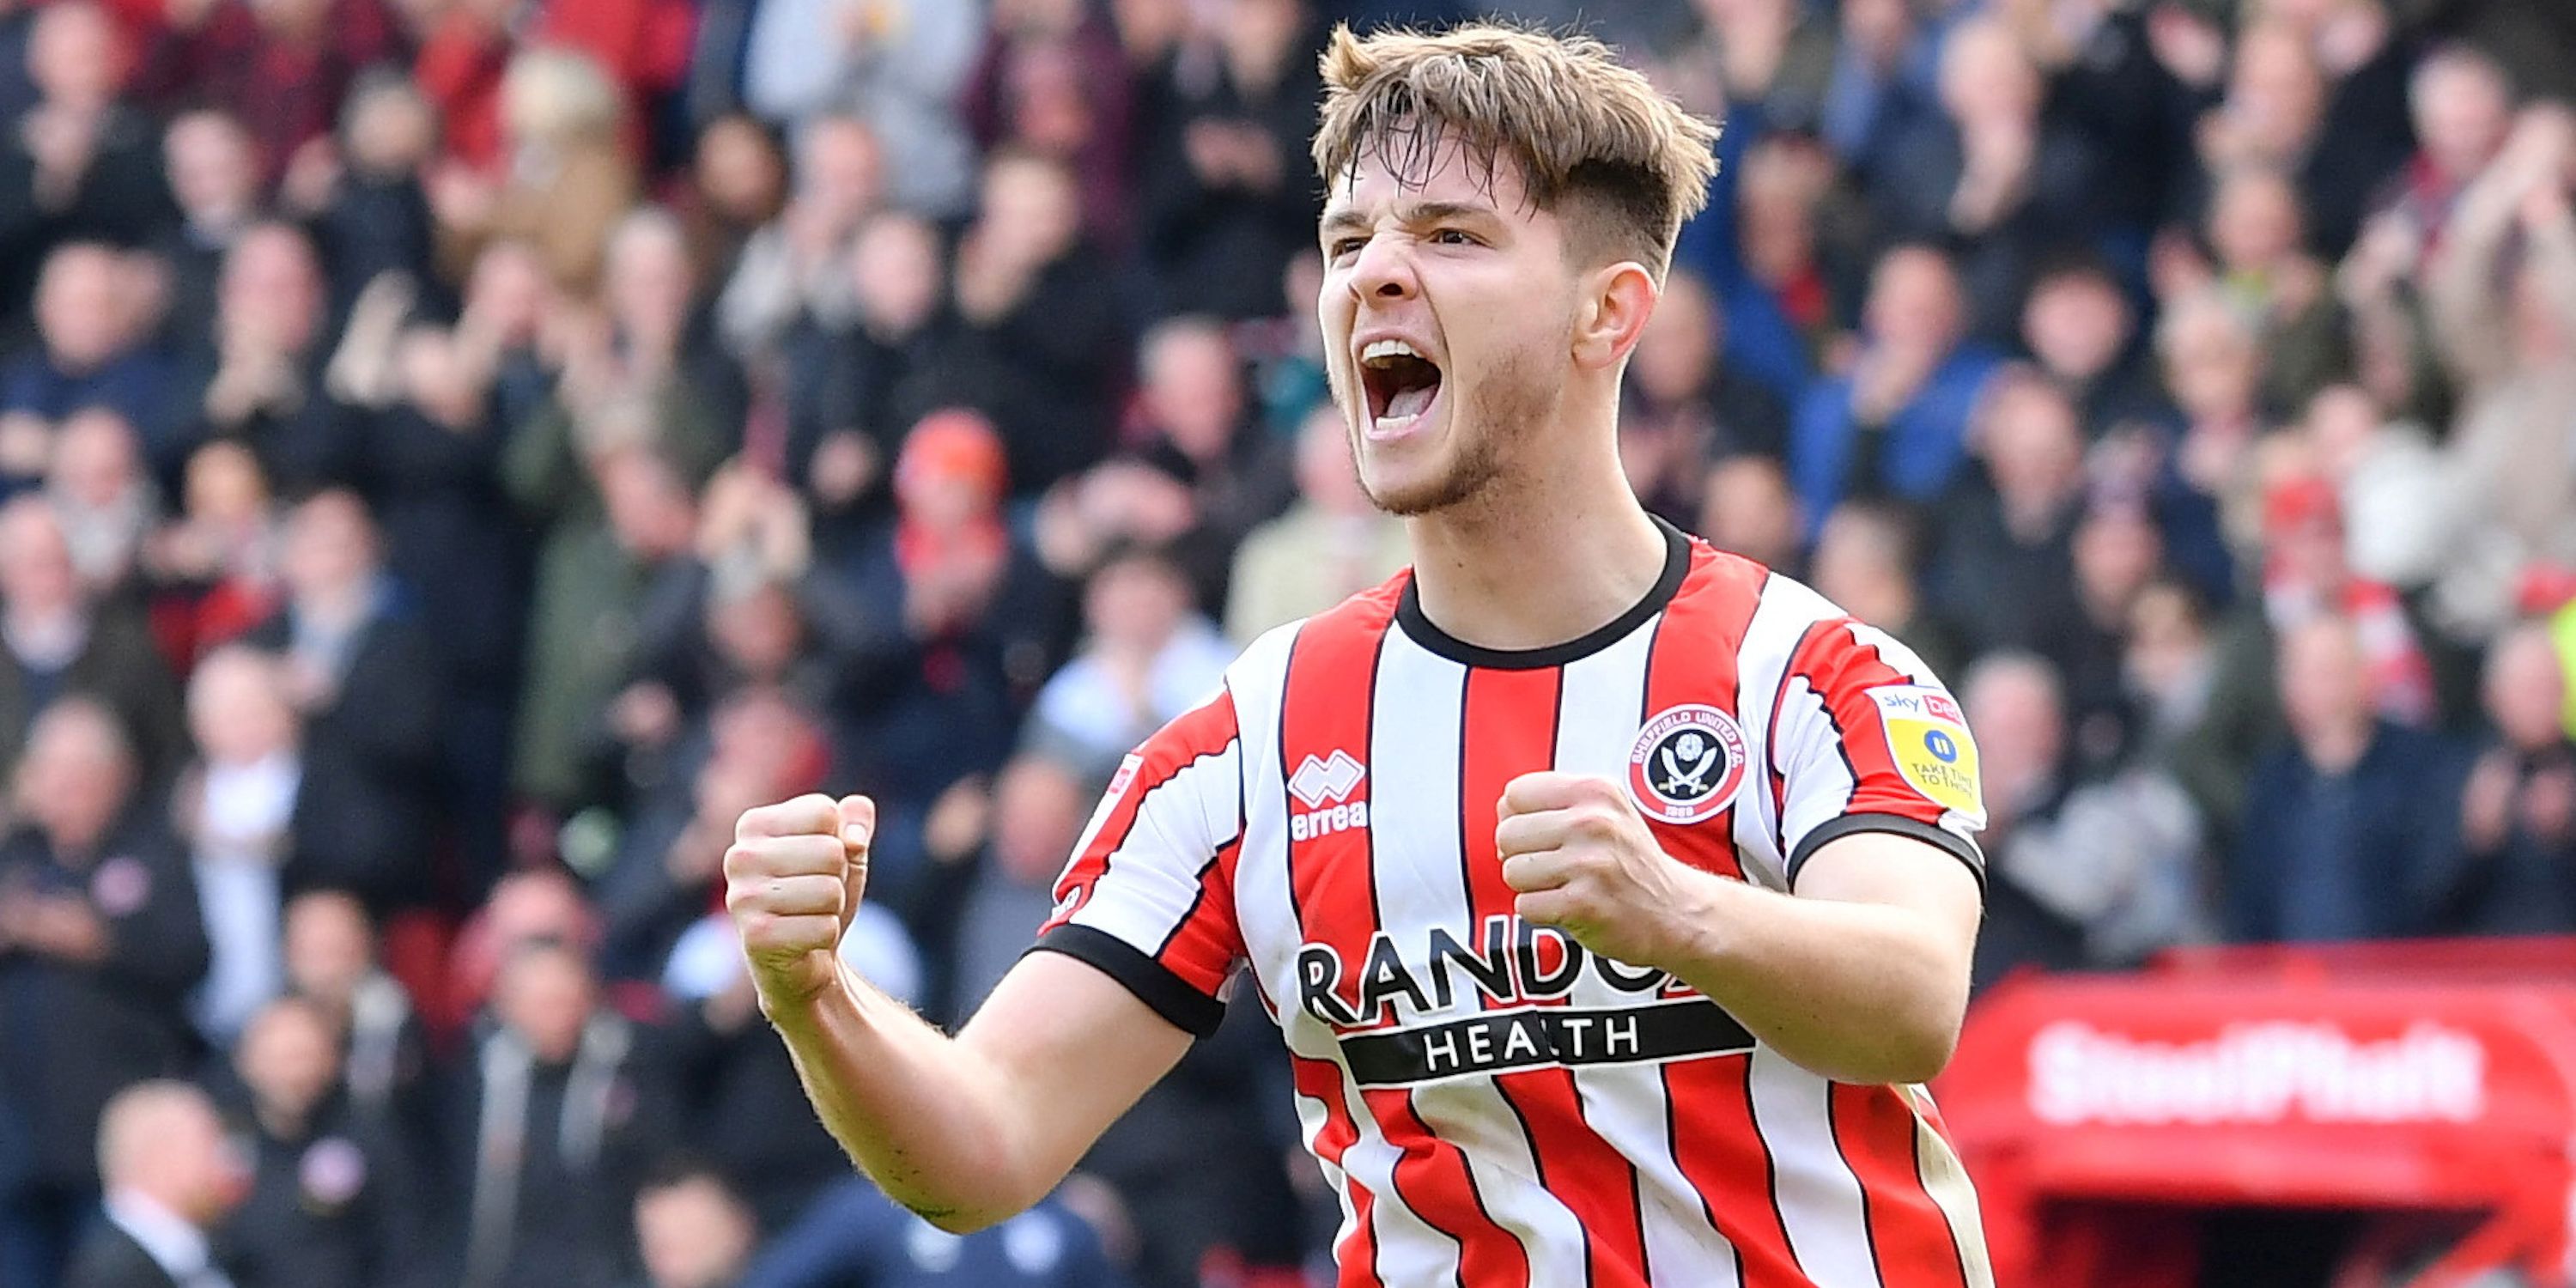 Sheffield United's James McAtee celebrates scoring their first goal